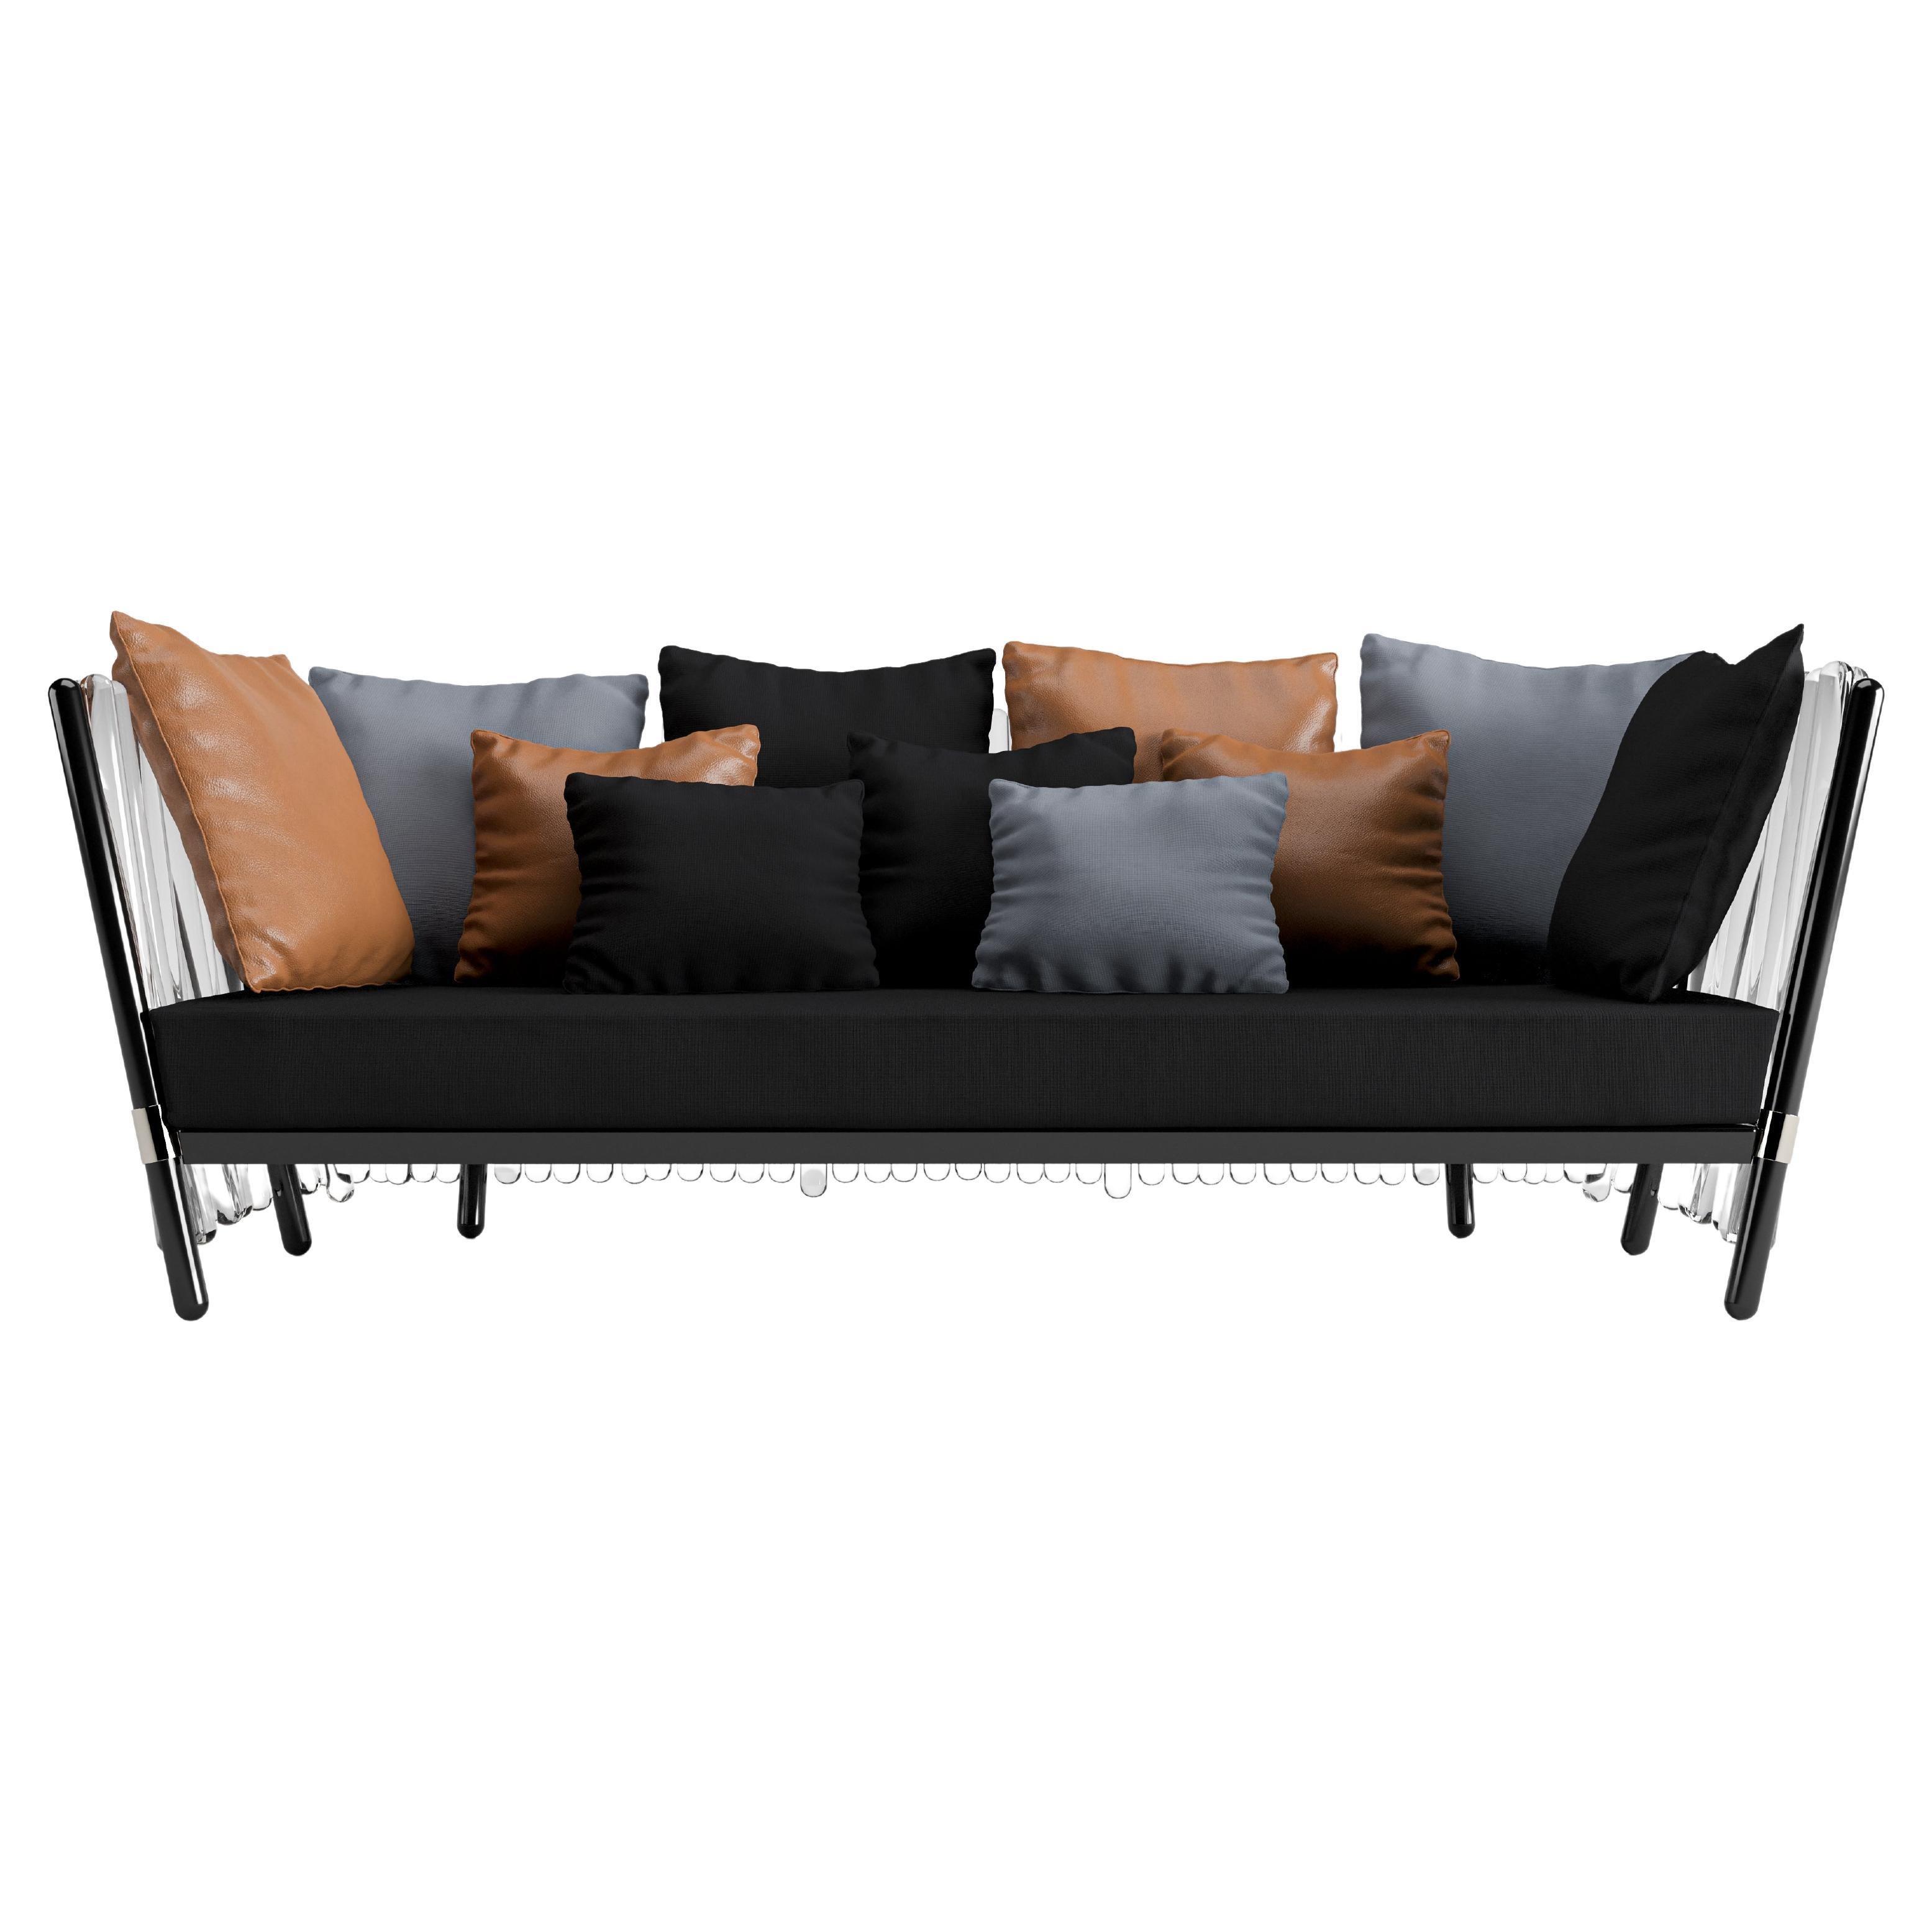 Houdini outdoor sofa

Relaxing in the outdoor space with a touch of magic and sophistication, it’s what the Houdini sofa provides. 

The whole design of this contemporary outdoor sofa was developed according to the following structure: 
- Metallic